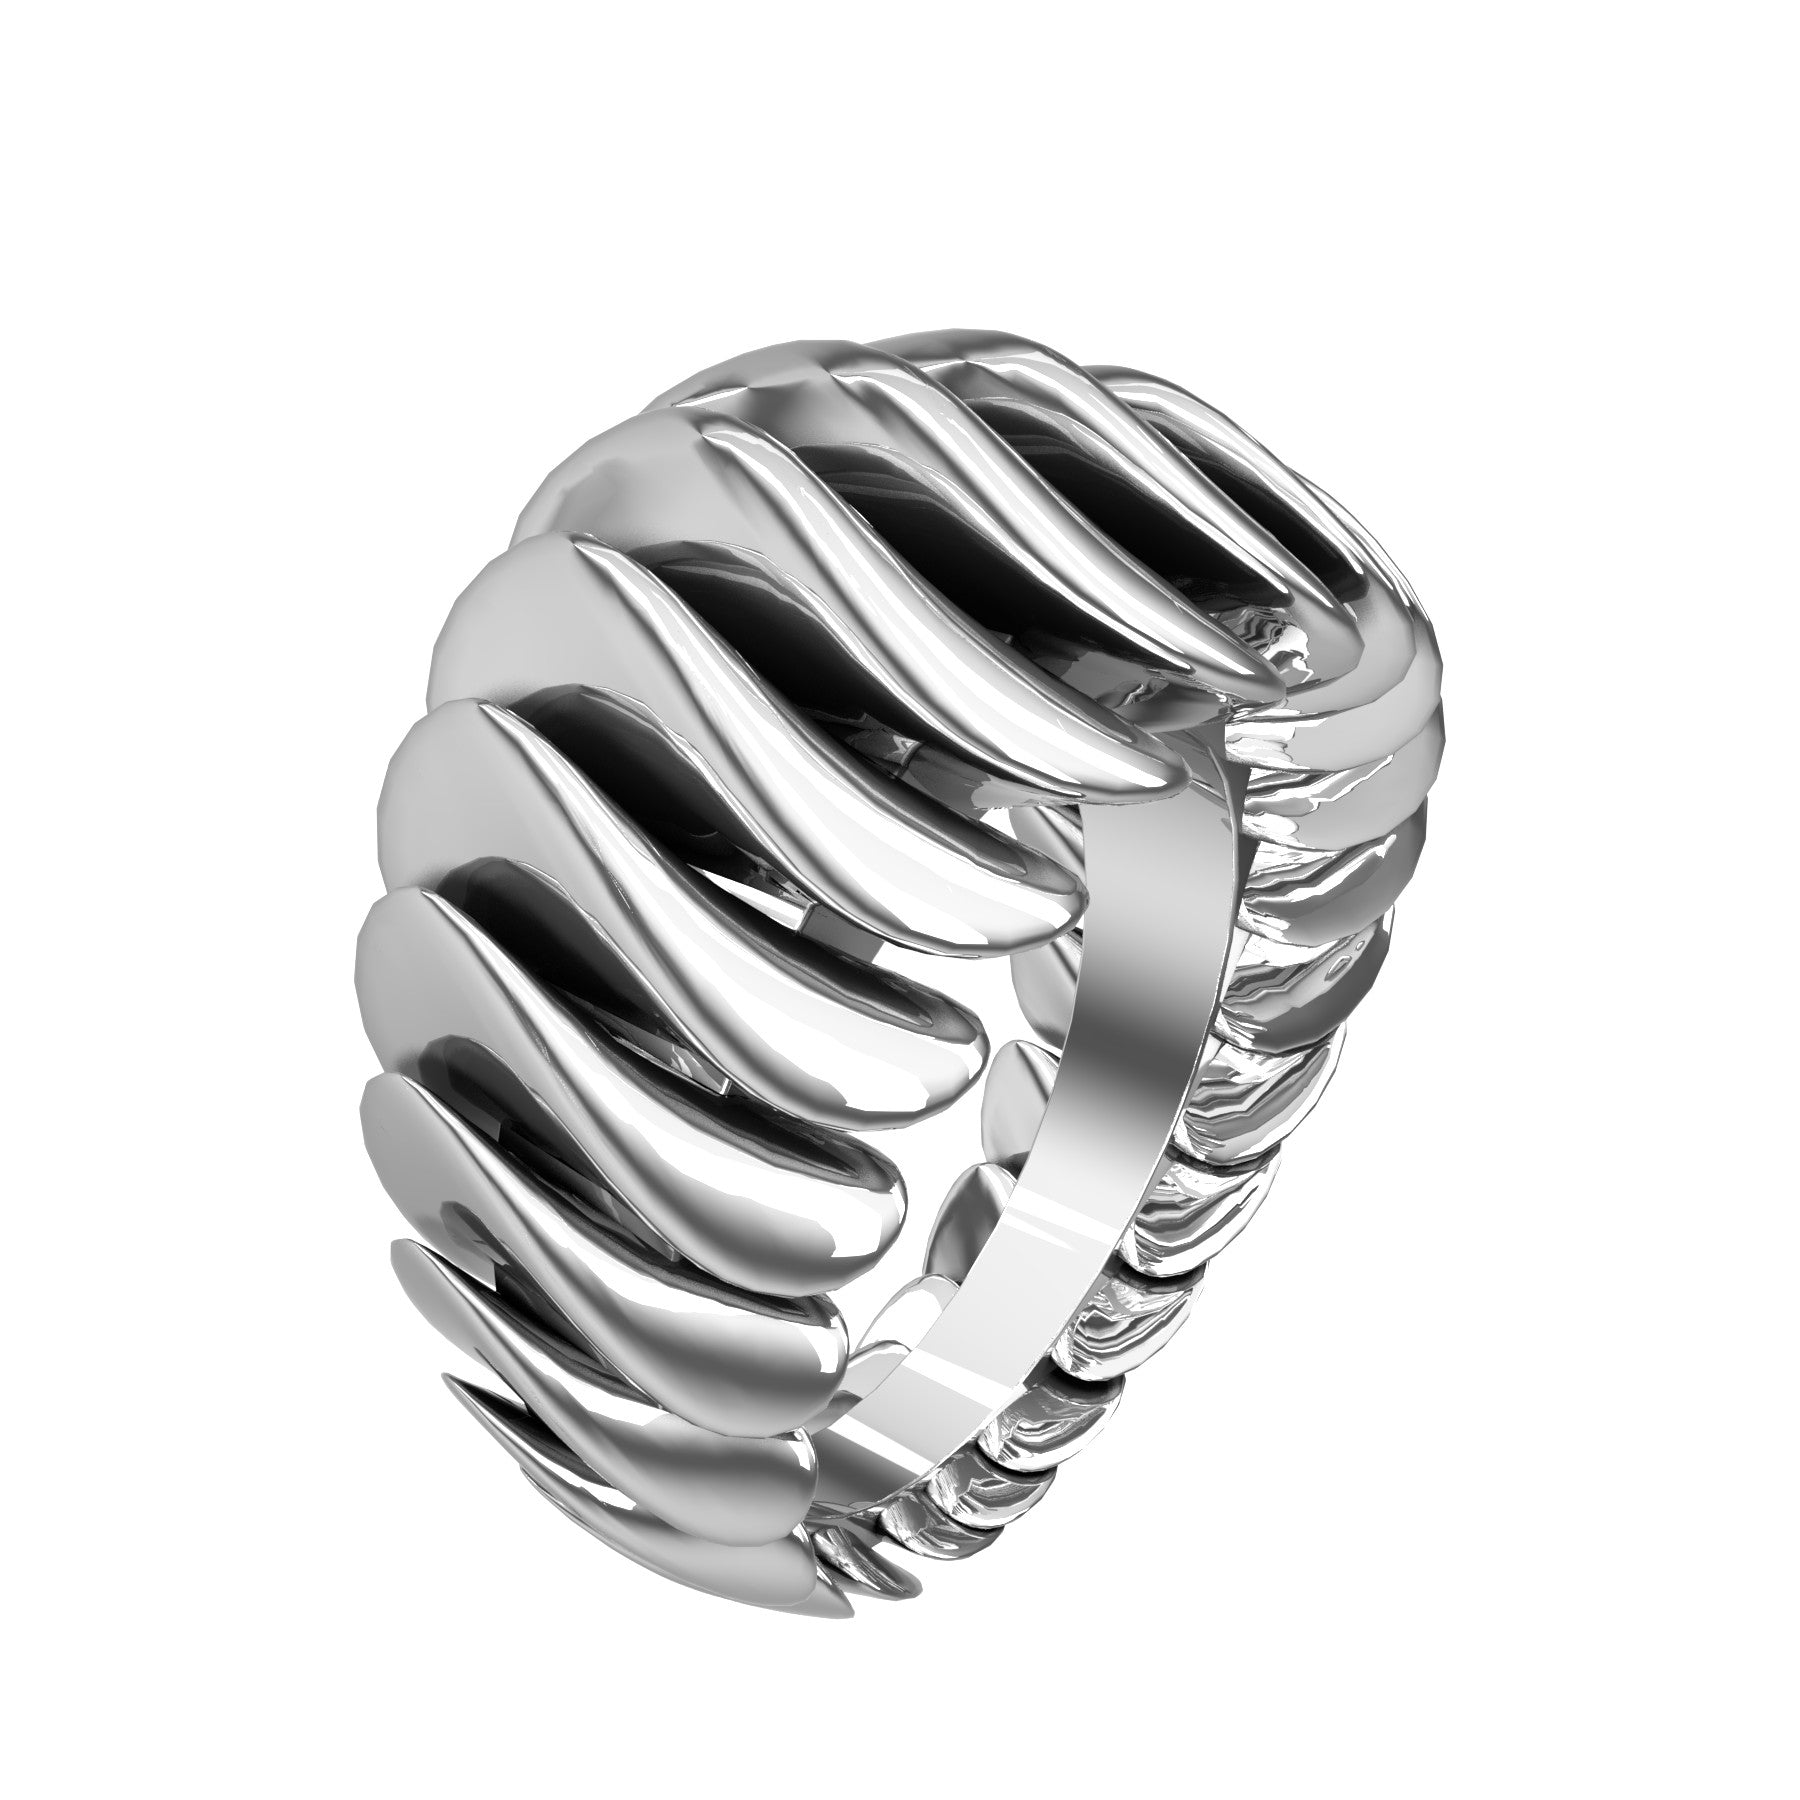 curvy ring, 18 K white gold, weight about 21,3 g. (0.75 oz), width 14,6 mm max